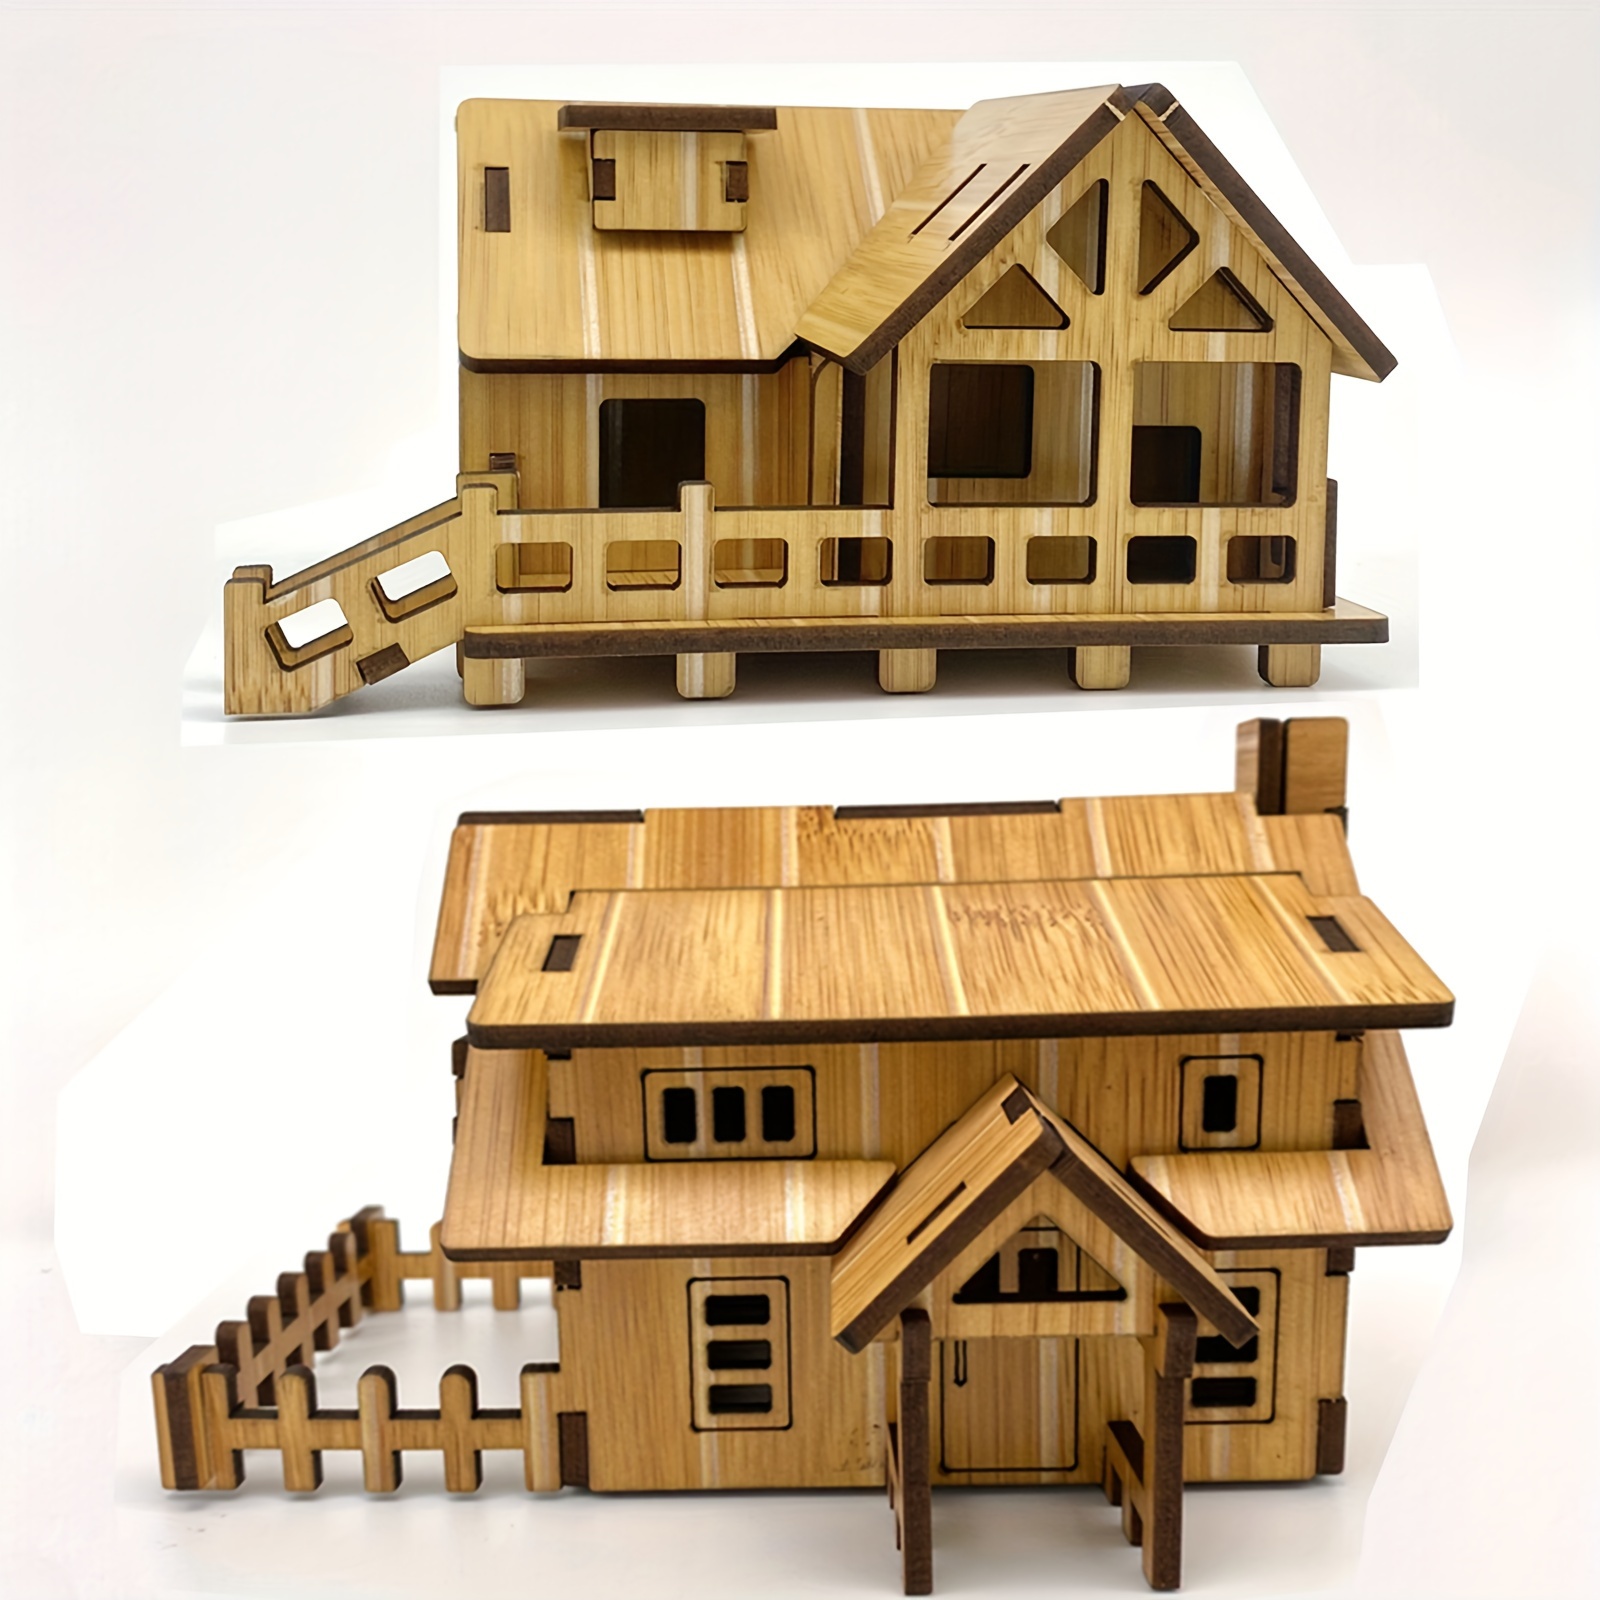 

Set of 2 DIY wooden architectural model puzzle kits, including a Western-style cottage model and a seaside villa model. These 3D jigsaw puzzle craft kits are laser cut for easy assembly.